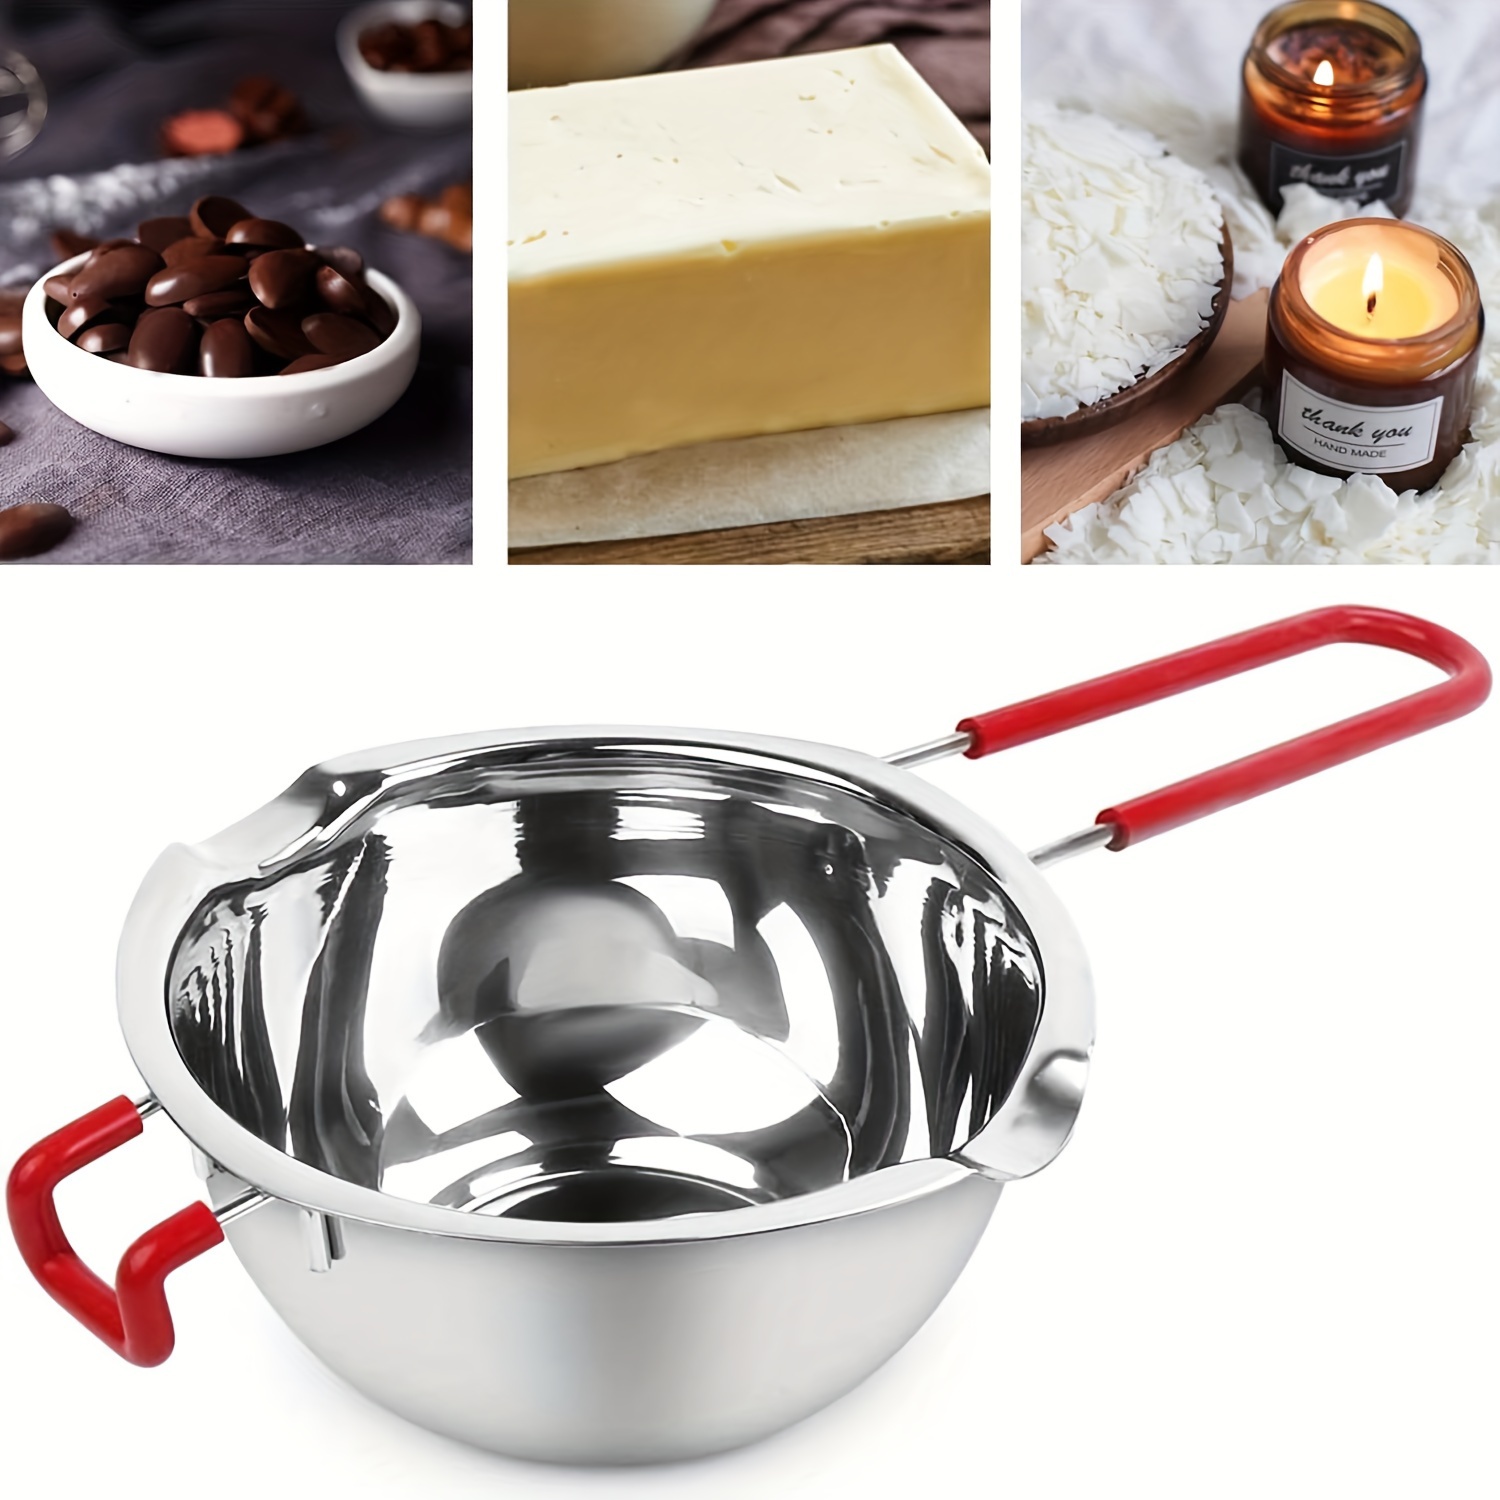 2 Pcs Candle Wax Melting Pot Long Handled 600ml Chocolate Cheese Melting  Pot Stainless Steel Anti-Rust for Water Heating To Melt